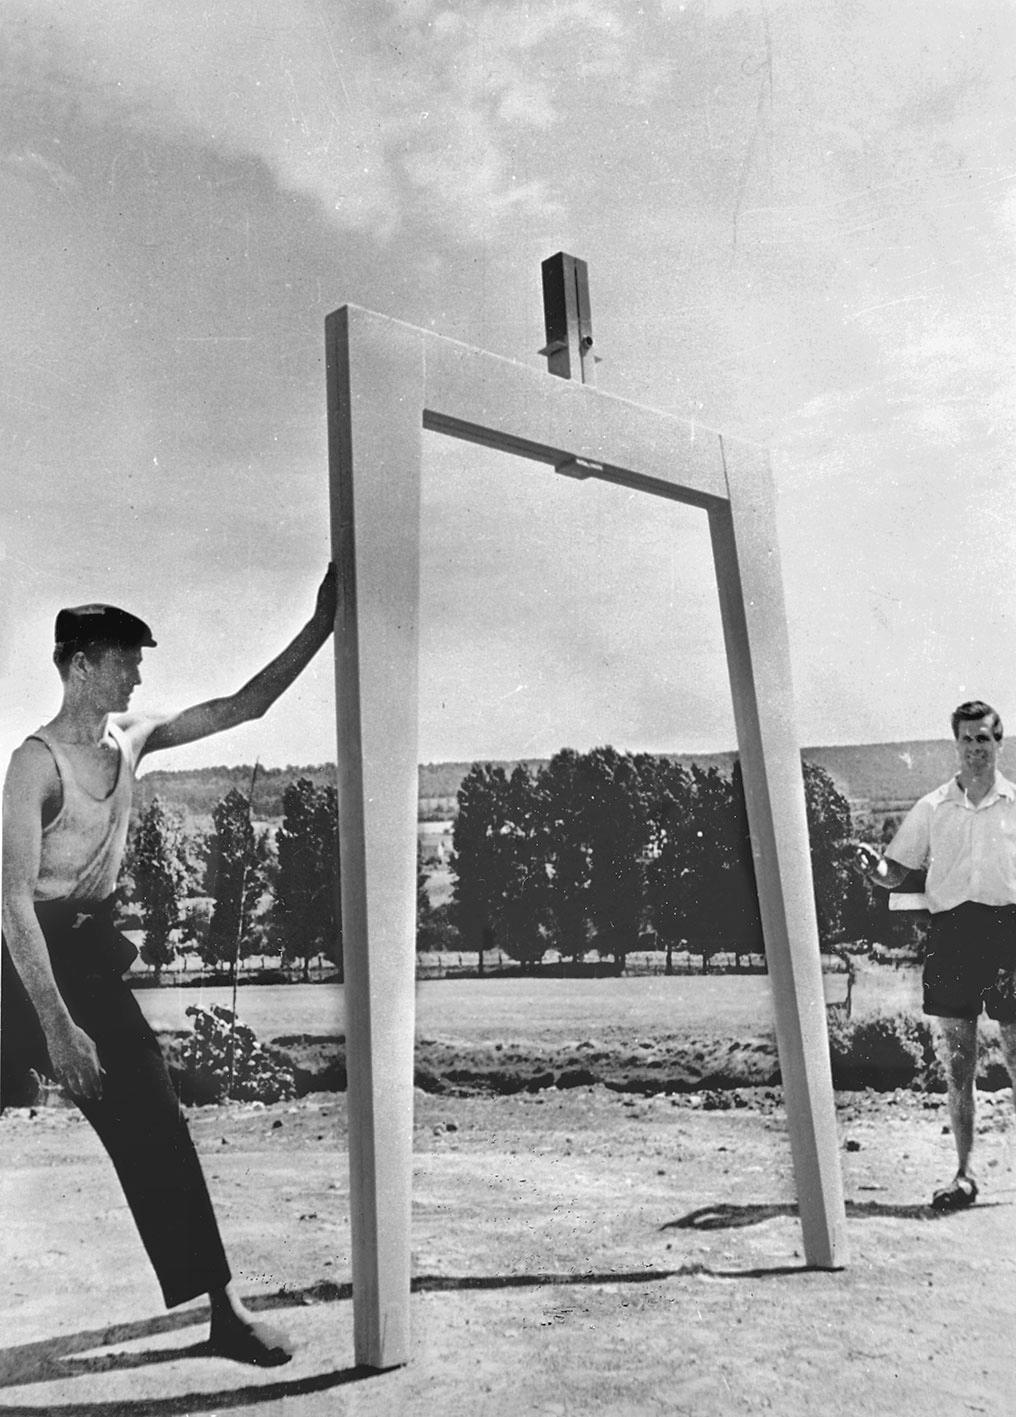 Pierre Prouvé and a colleague show the components of the Métropole houses: inverted U axial portal frame with central square-section swivel, c. 1950.